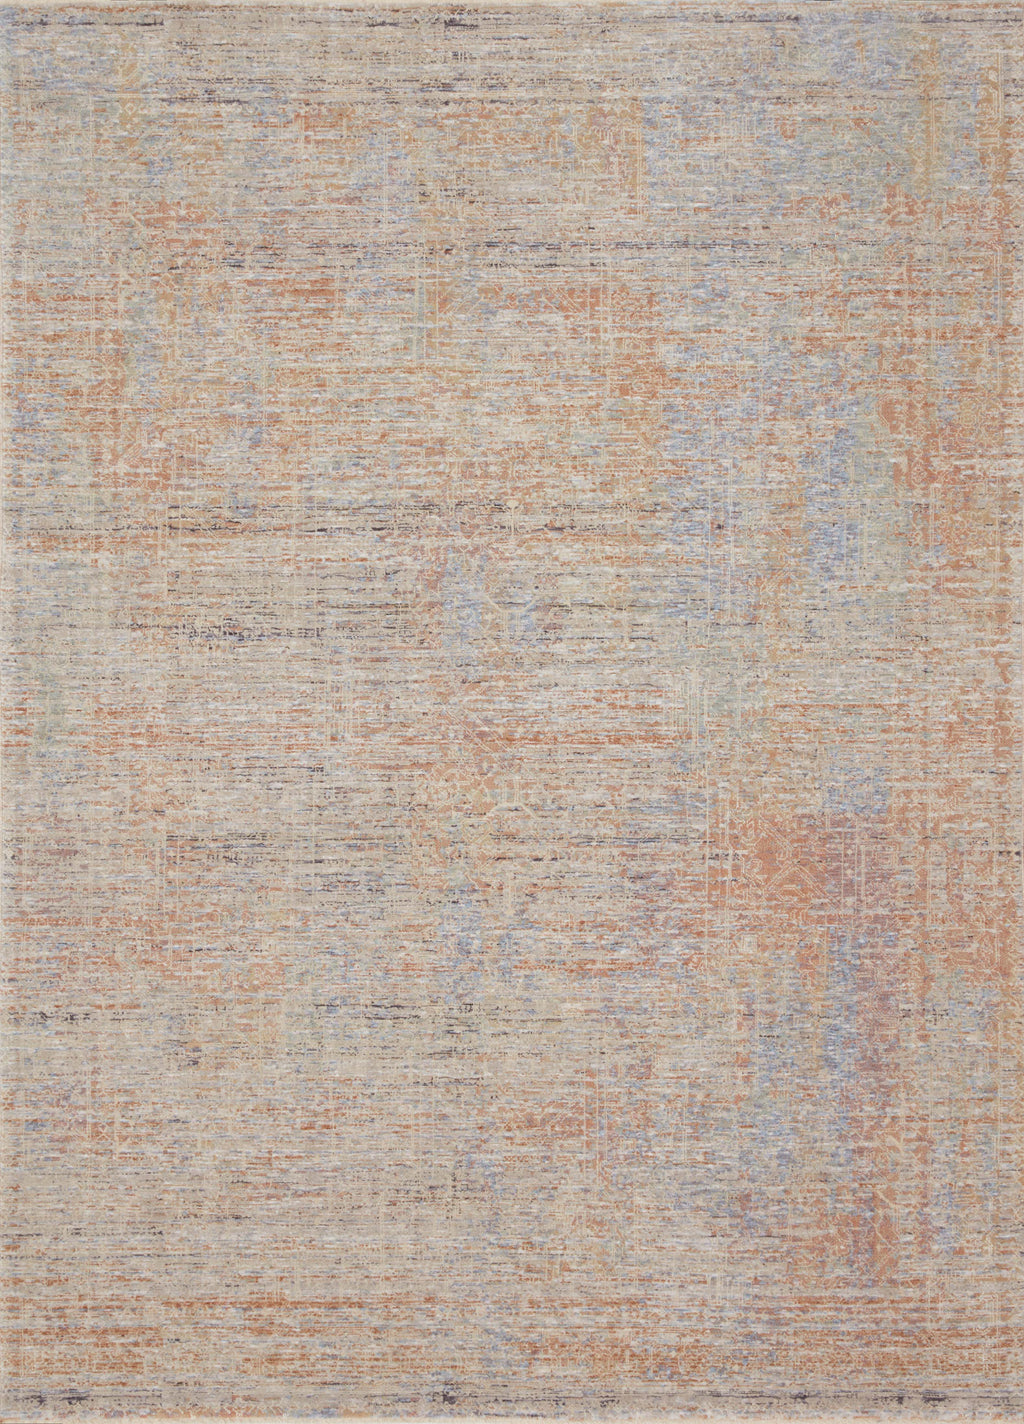 FAYE Collection Rug  in  Santa Fe / Blue Beige Accent Power-Loomed Jute/Wool